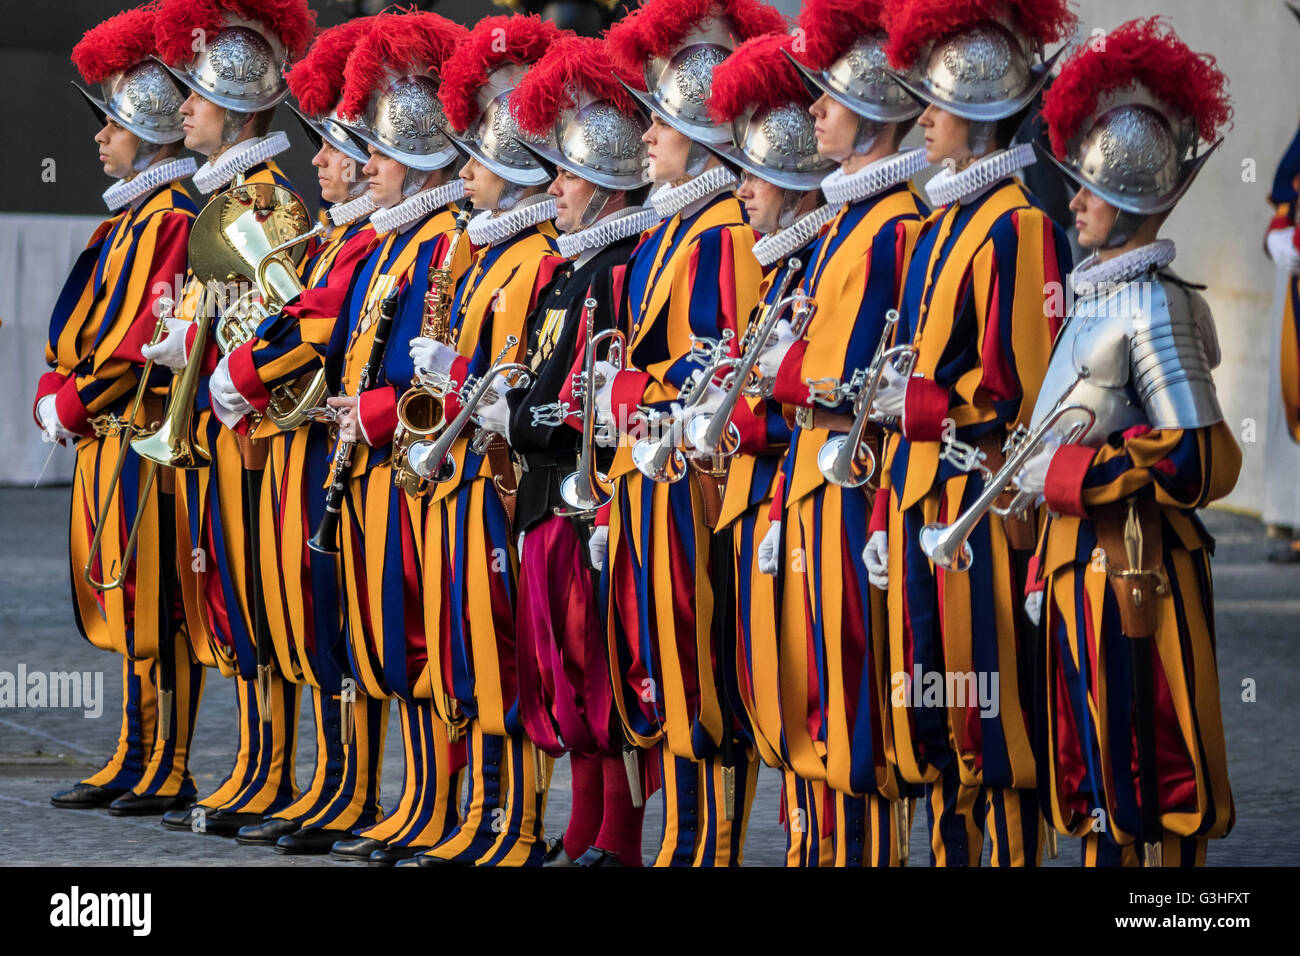 Vatican City, Vatican. 06th May, 2016. Swiss Guards take part in a swearing-in ceremony in San Damaso Courtyard. The annual swearing-in ceremony for the new papal Swiss Guards takes place on May 6, commemorating the 147 who died defending Pope Clement VII on the same day in 1527 during the sack of Rome. © Giuseppe Ciccia/Pacific Press/Alamy Live News Stock Photo